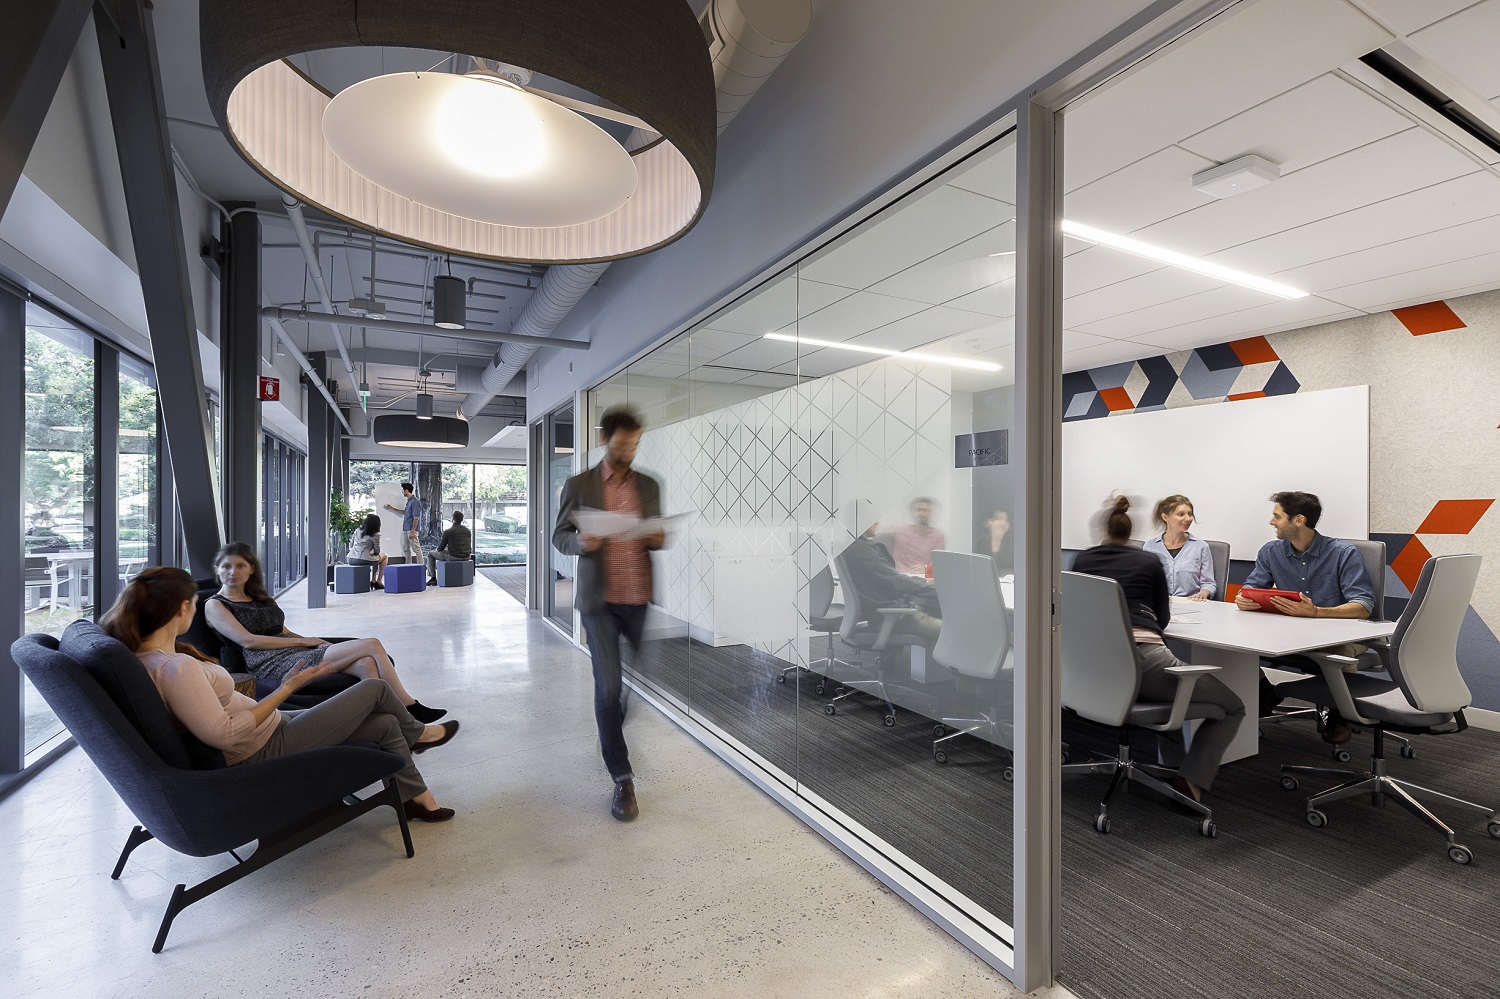 In the new 48,000-square-foot corporate office, Gigamon will have approximately 280 workstations, 16 private offices, and 50 meeting spaces.